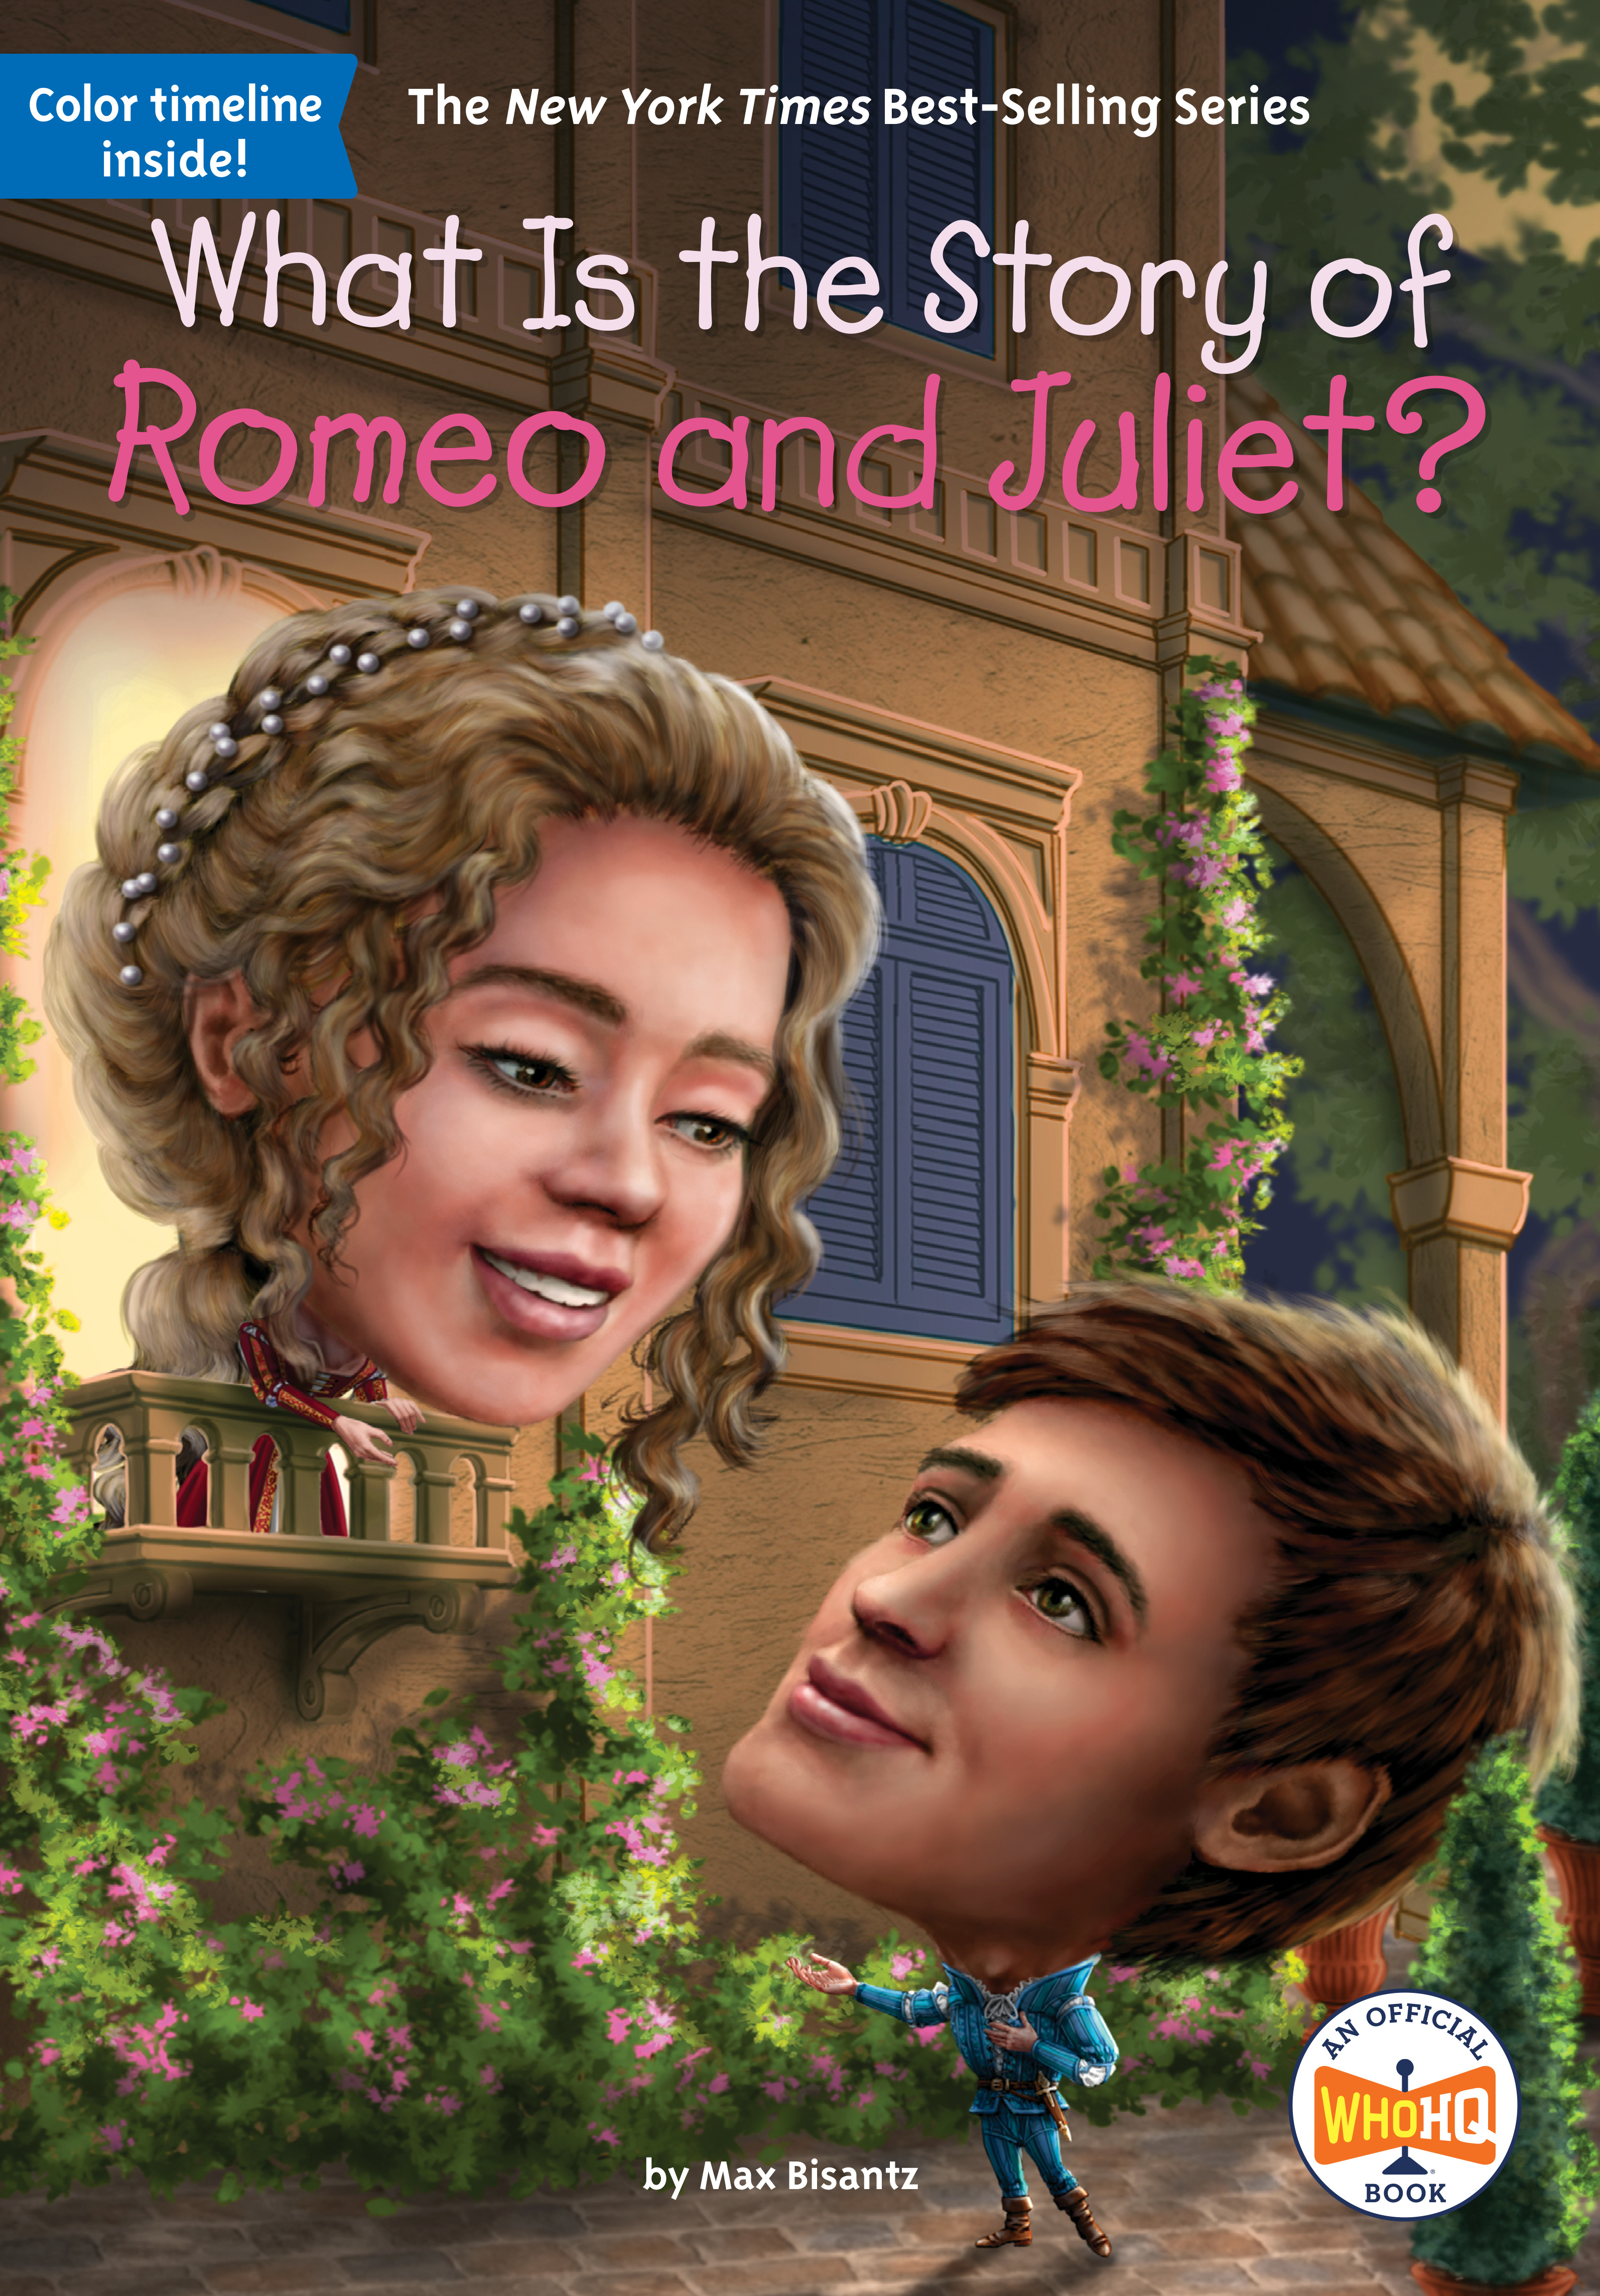 What Is the Story of Romeo and Juliet? | Bisantz, Max (Auteur) | Malan, David (Illustrateur)